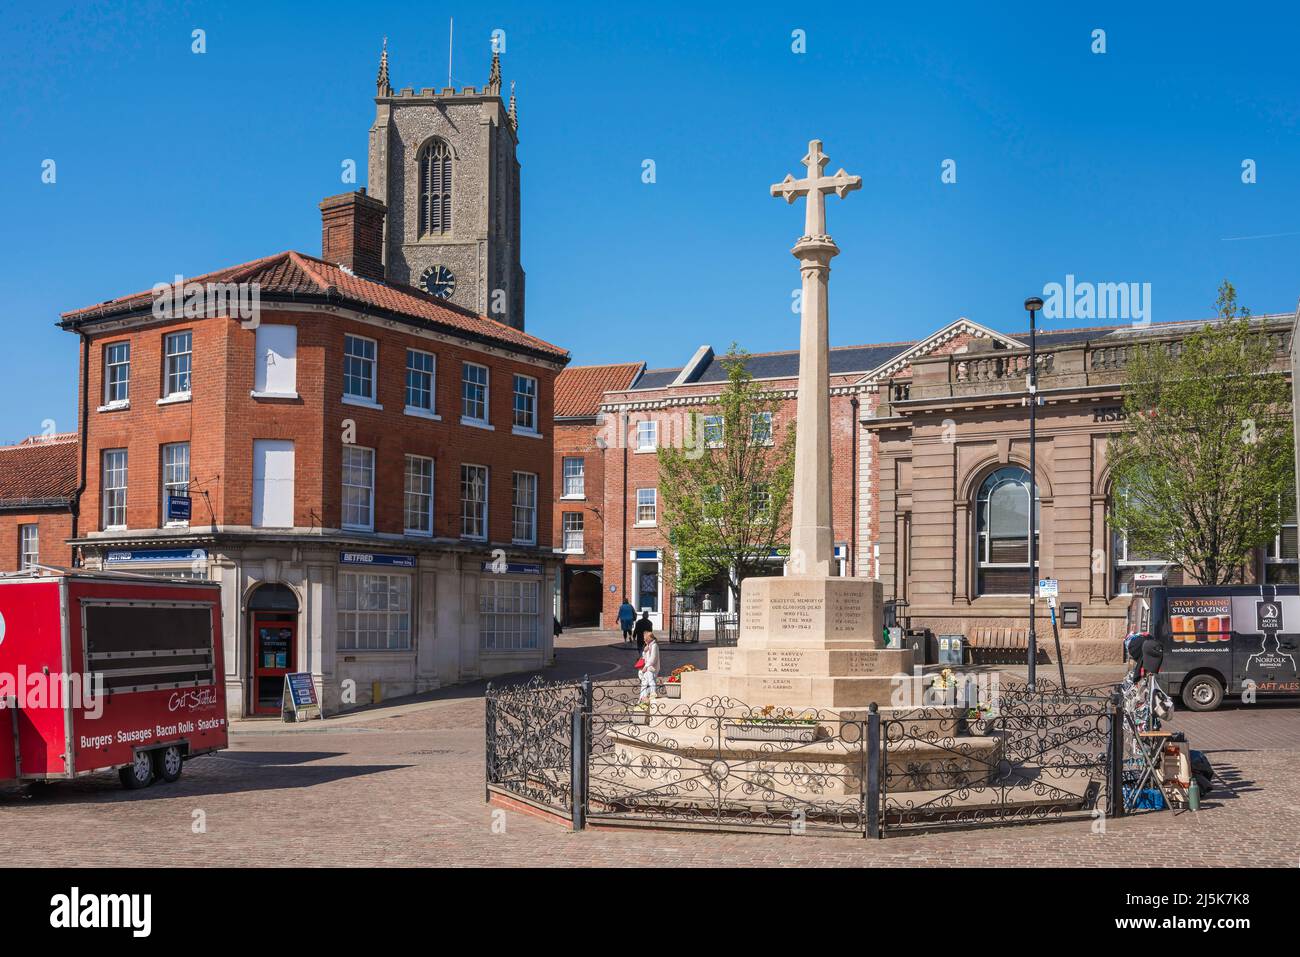 Fakenham Norfolk, view in summer of the war memorial sited in Market Place in the centre of the Norfolk town of Fakenham, UK Stock Photo